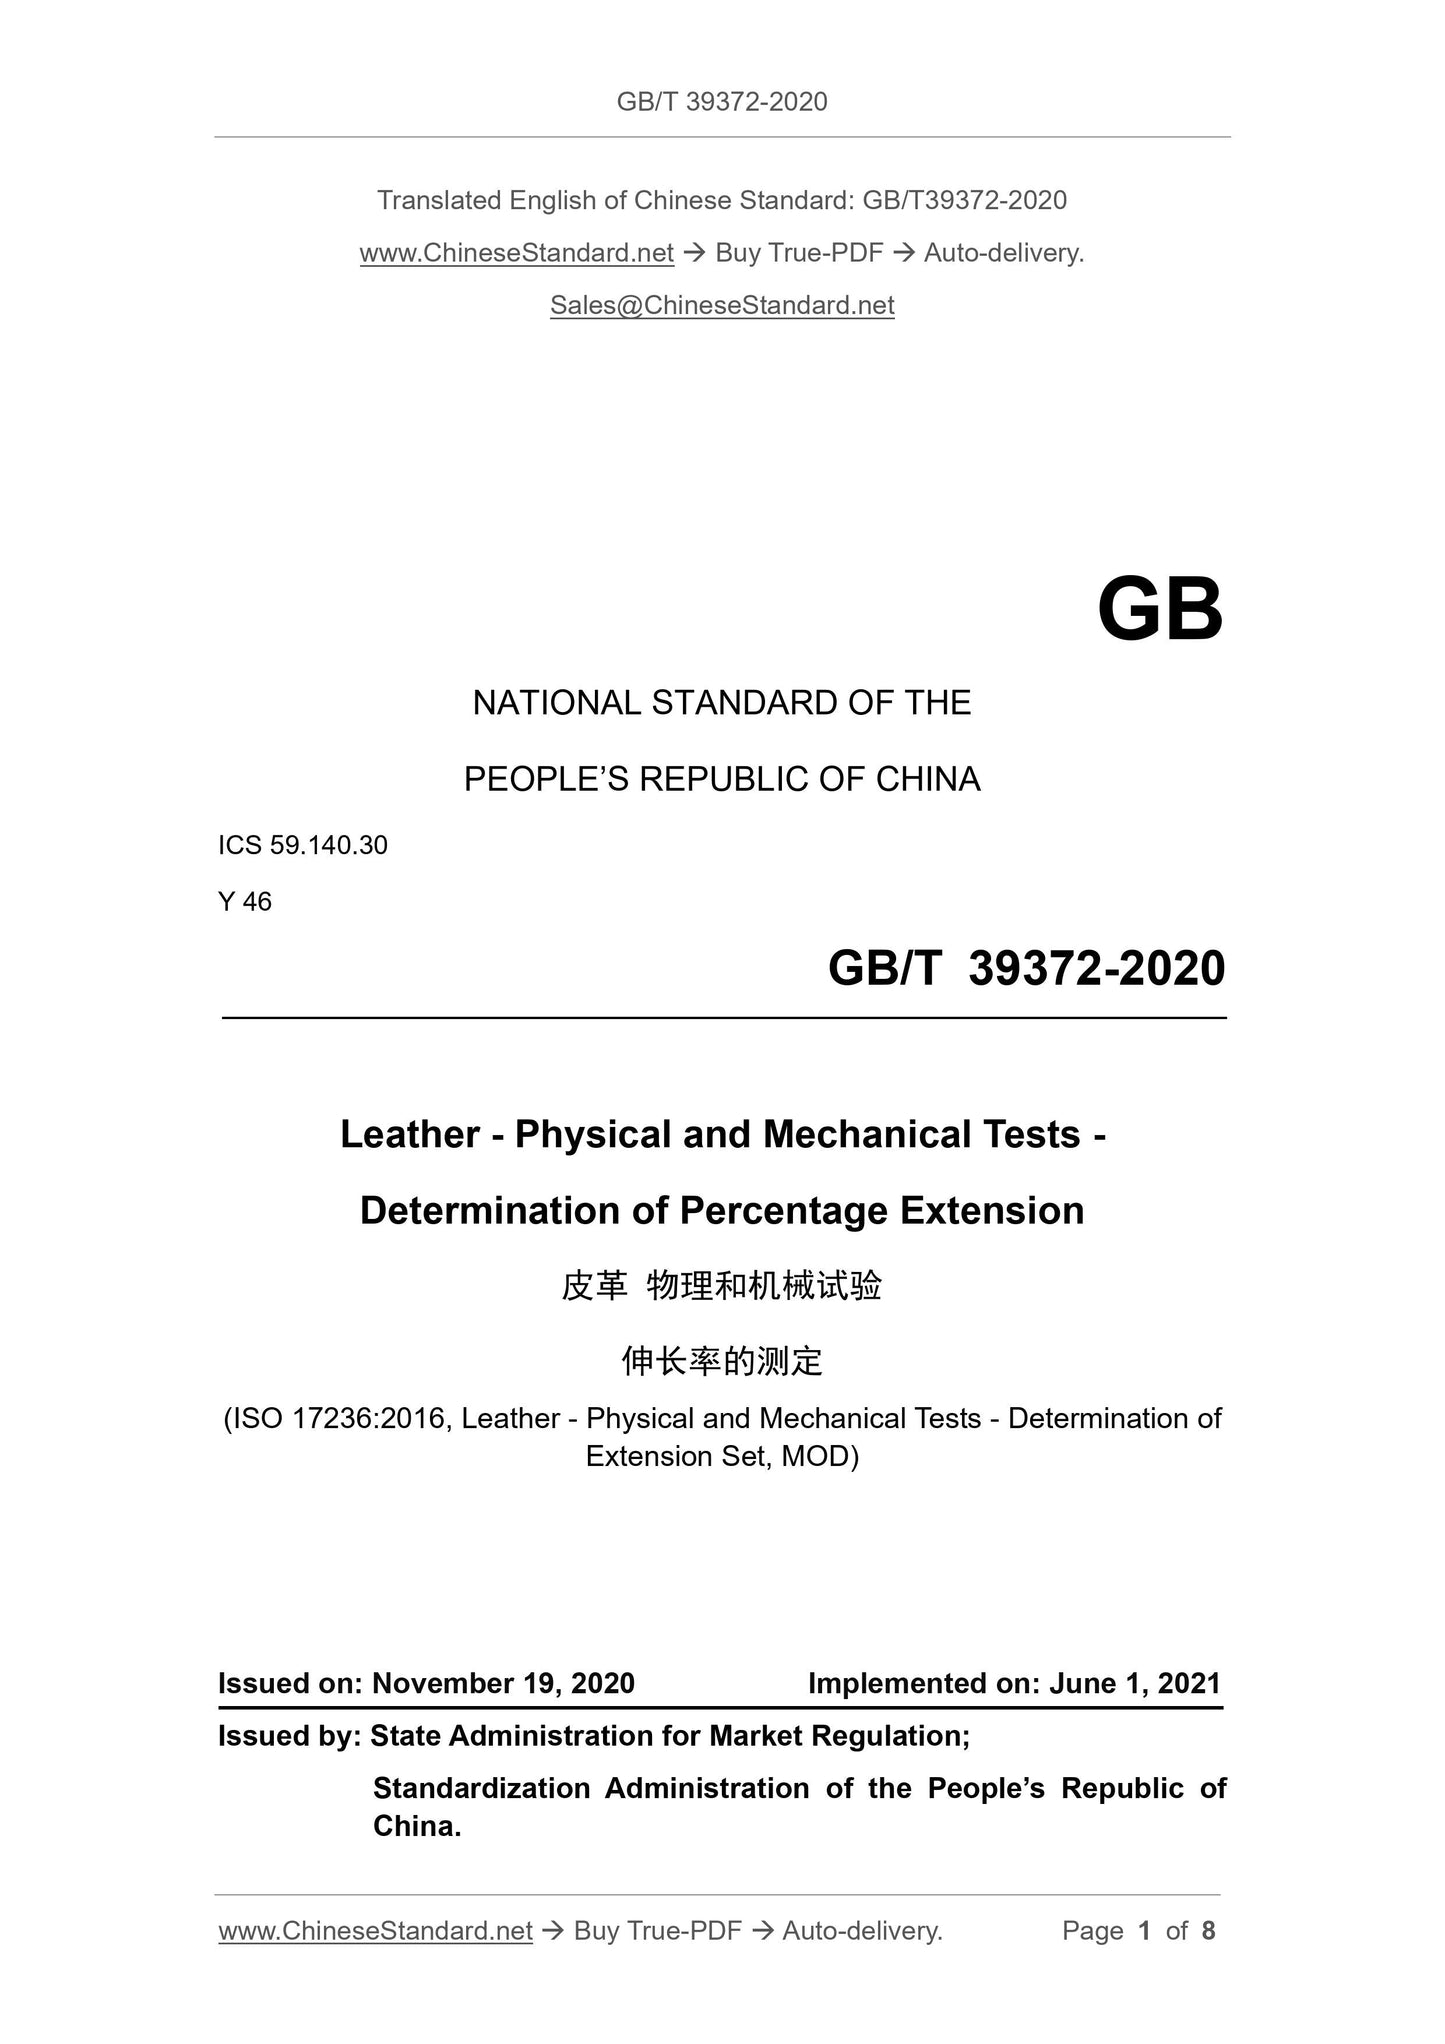 GB/T 39372-2020 Page 1